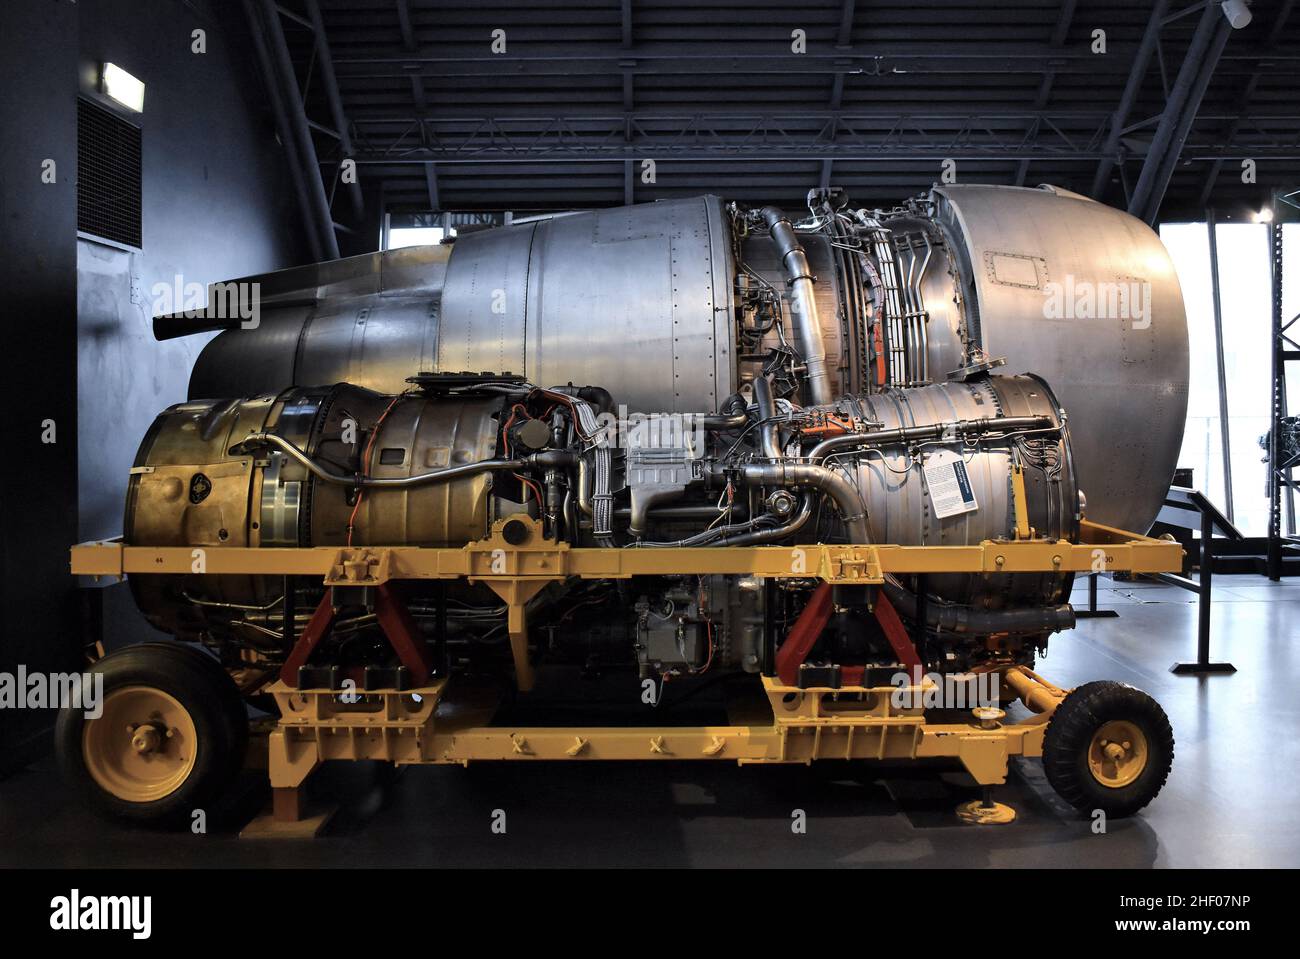 The Rolls-Royce RB211 - turbofan jet engine displayed at Science Museum in London UK. Stock Photo